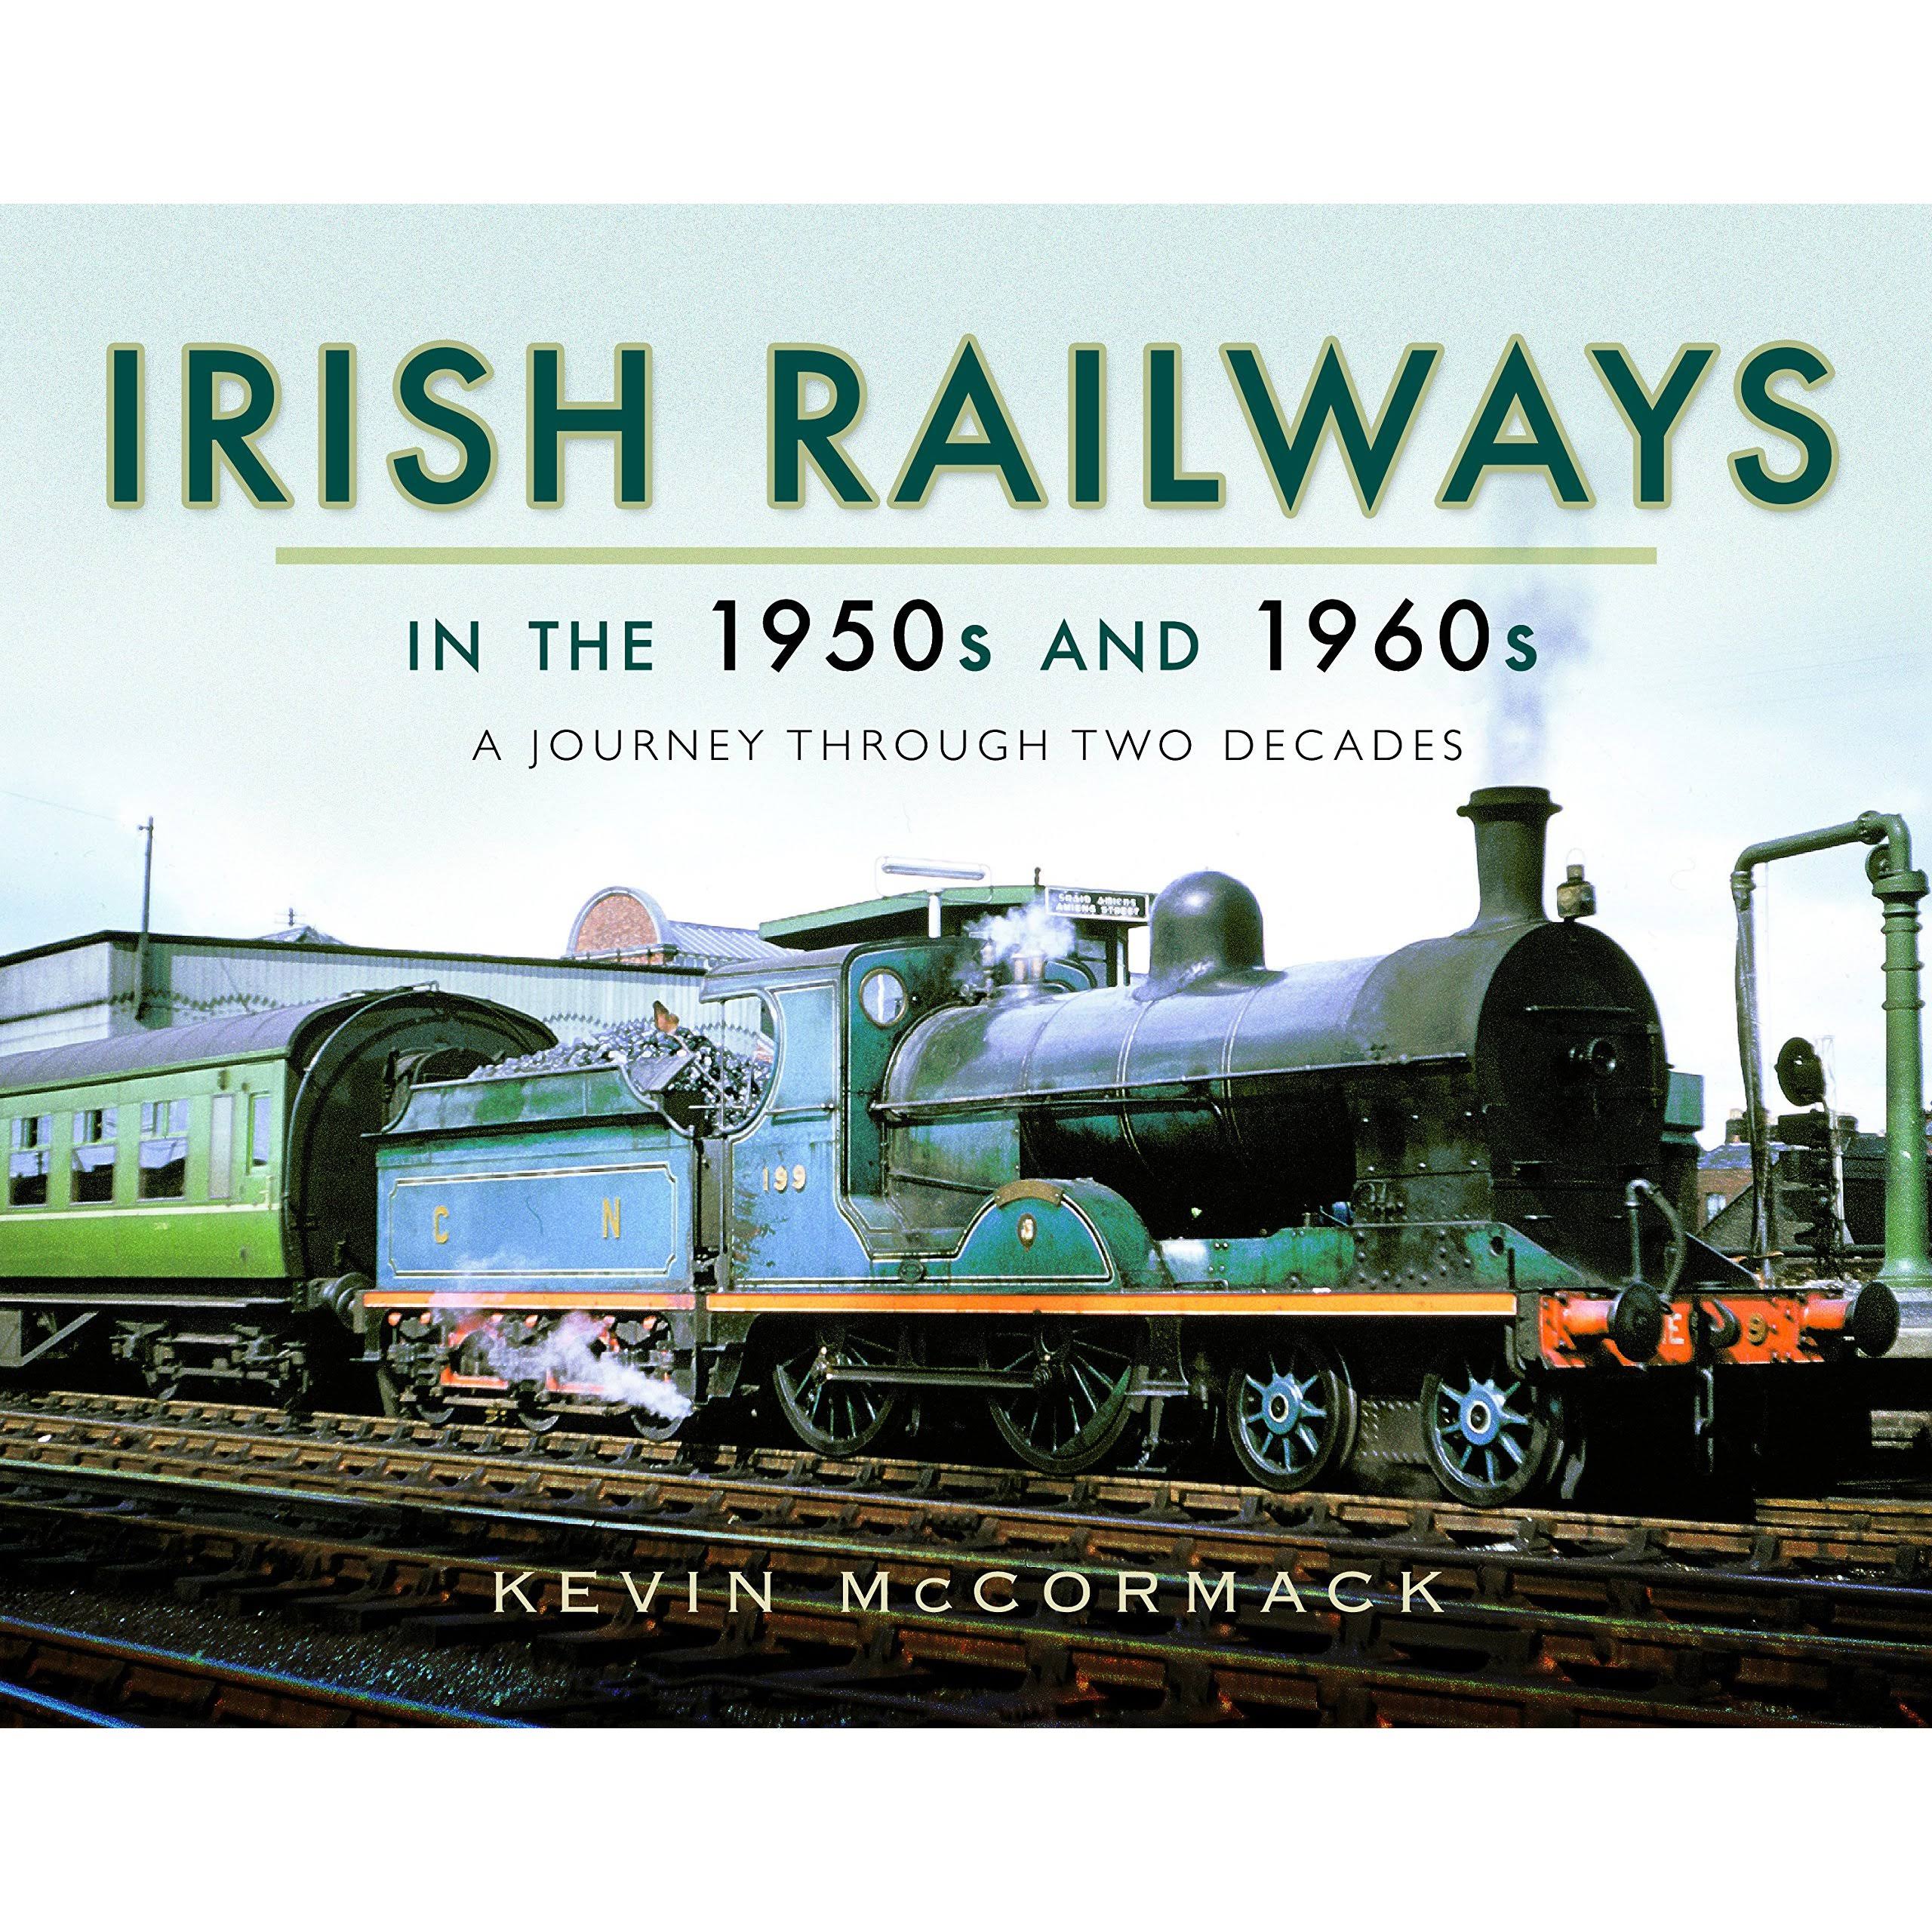 Irish Railways in the 1950s And 1960s: A Journey Through Two Decades [Book]